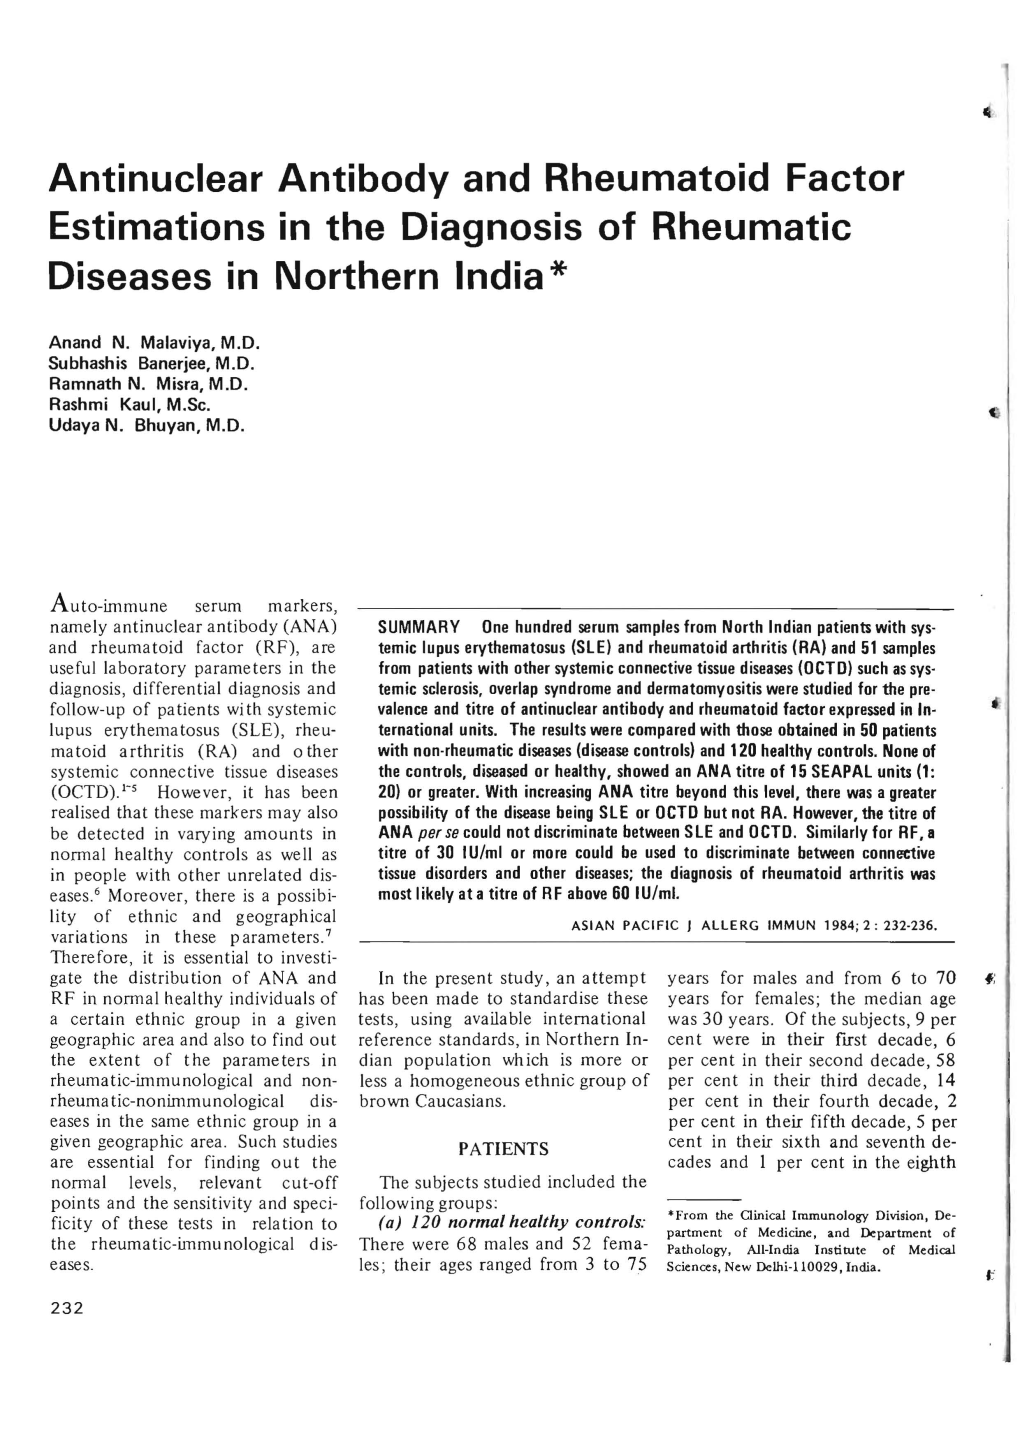 Antinuclear Antibody and Rheumatoid Factor Estimations in the Diagnosis of Rheumatic Diseases in Northern India *